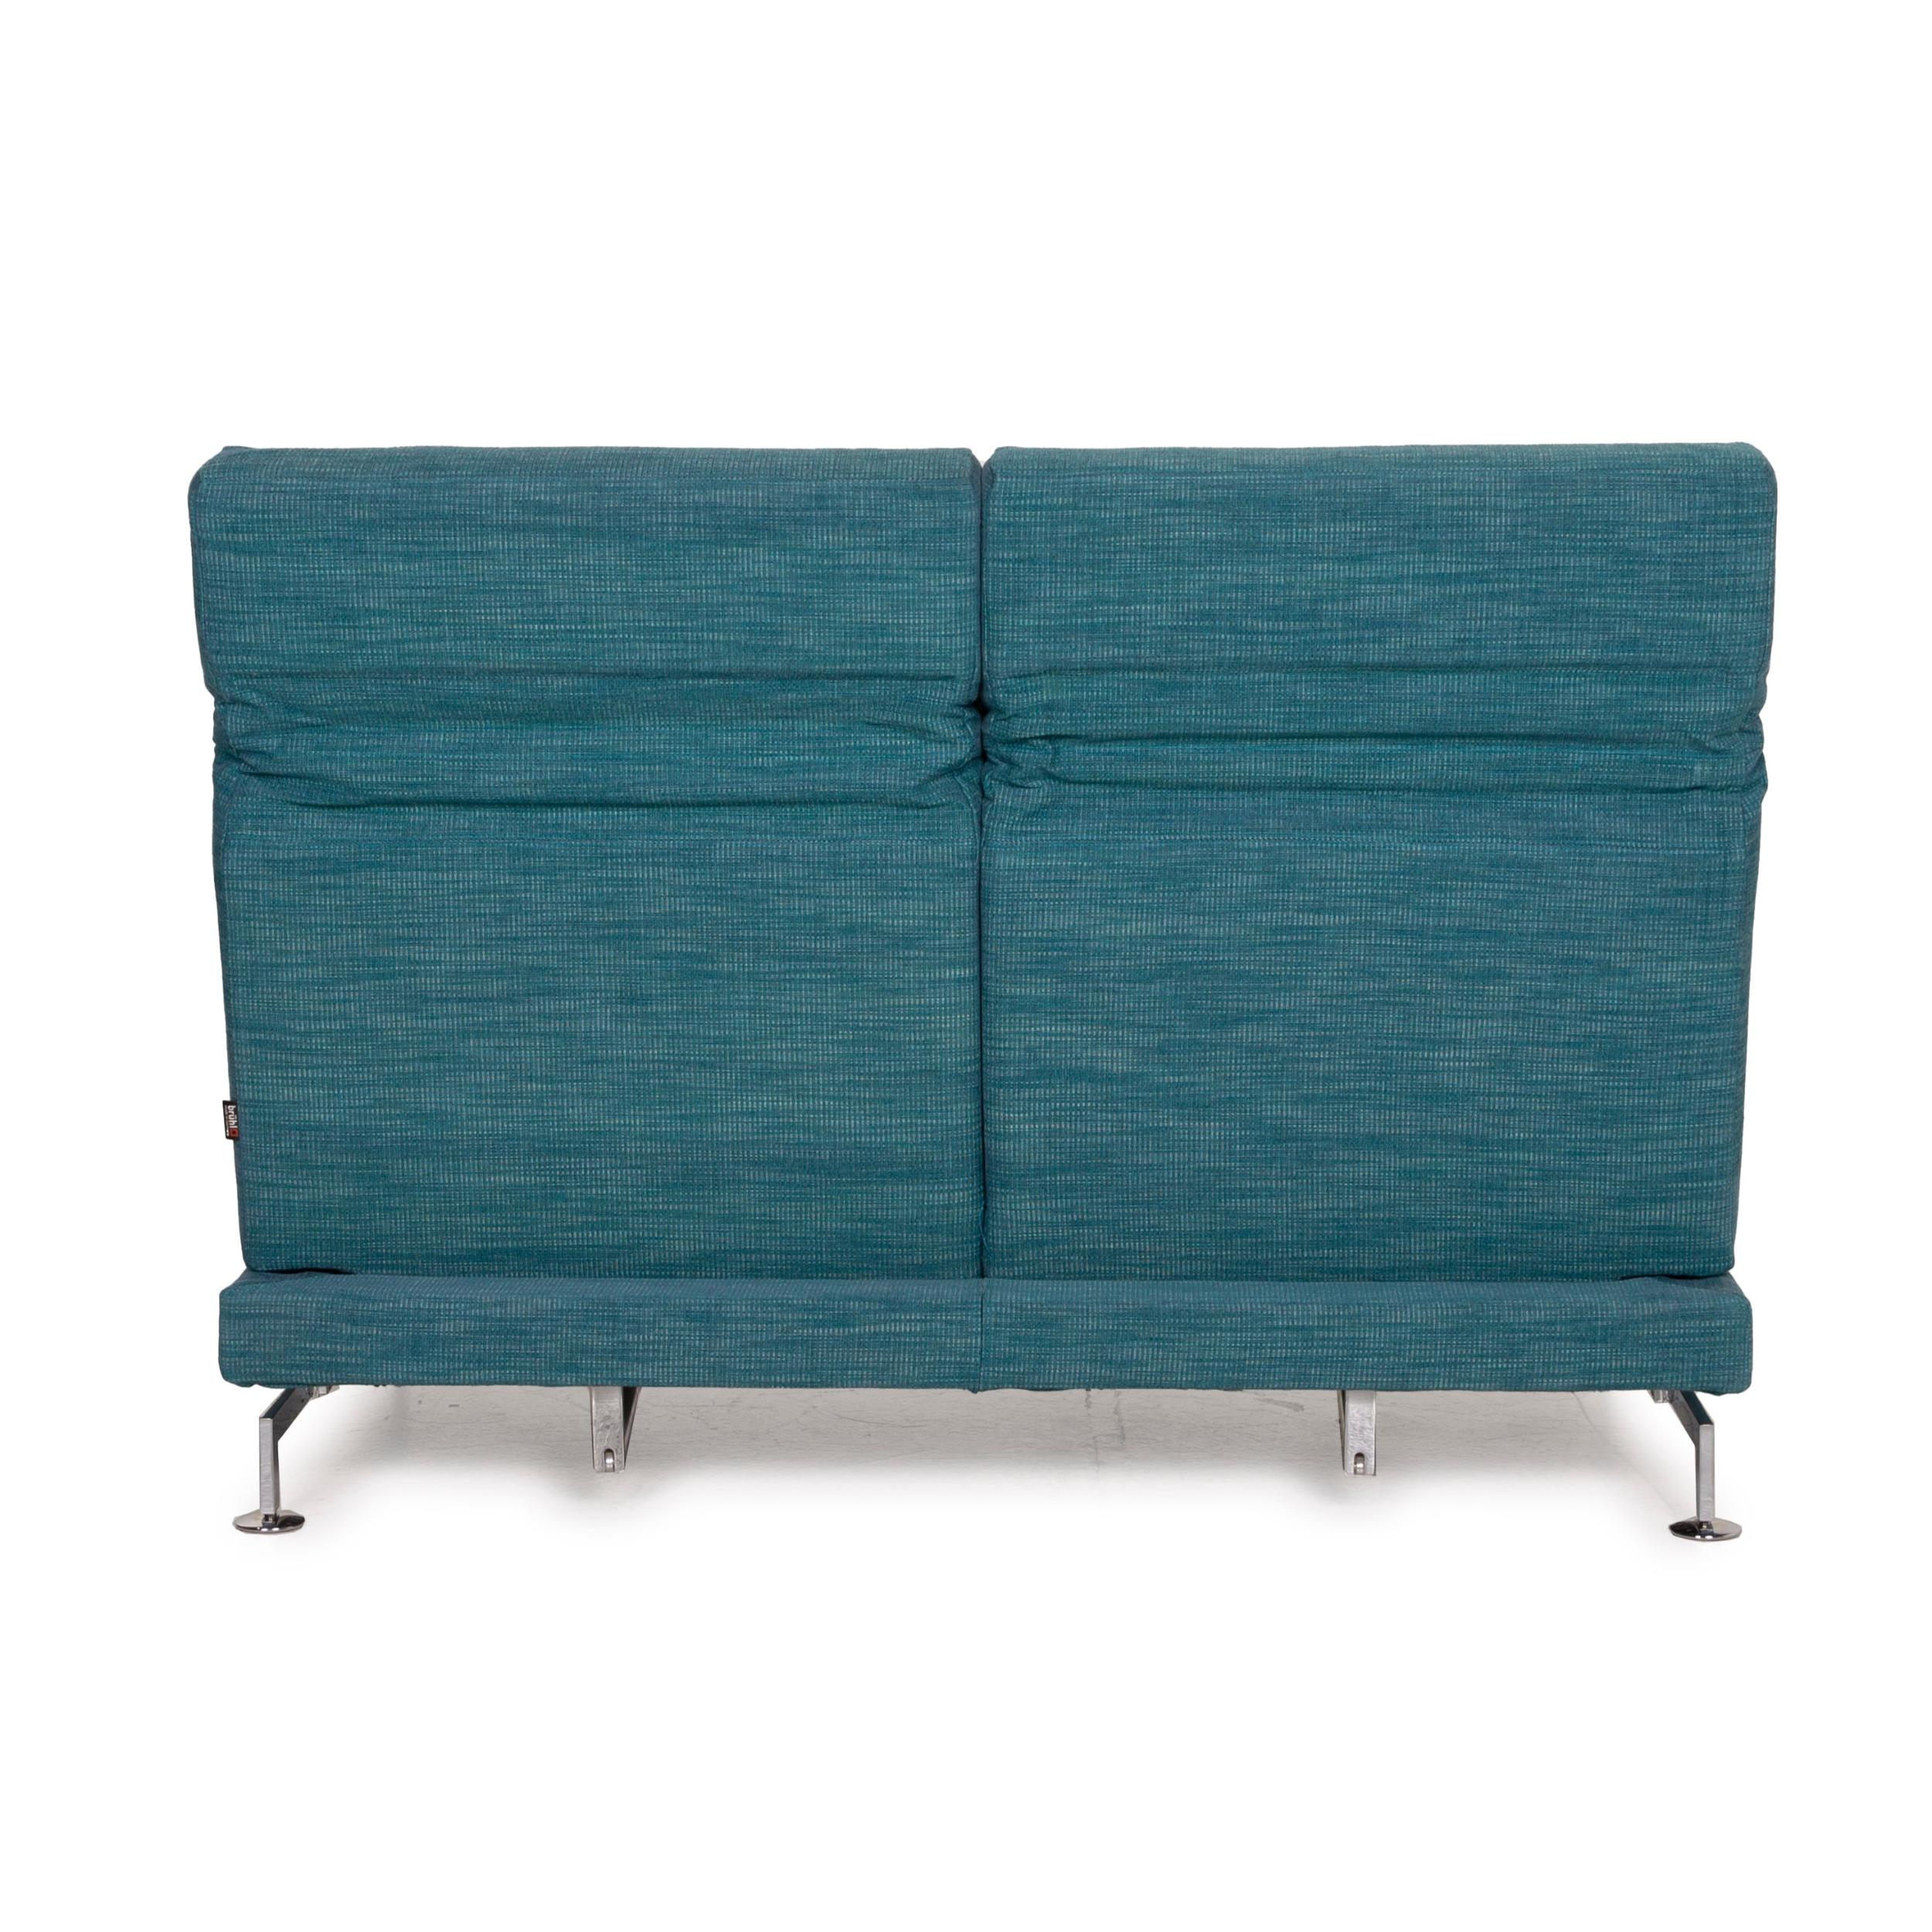 Brühl & Sippold Moule Fabric Sofa Blue Two-Seater Reclining Function Turquoise For Sale 5